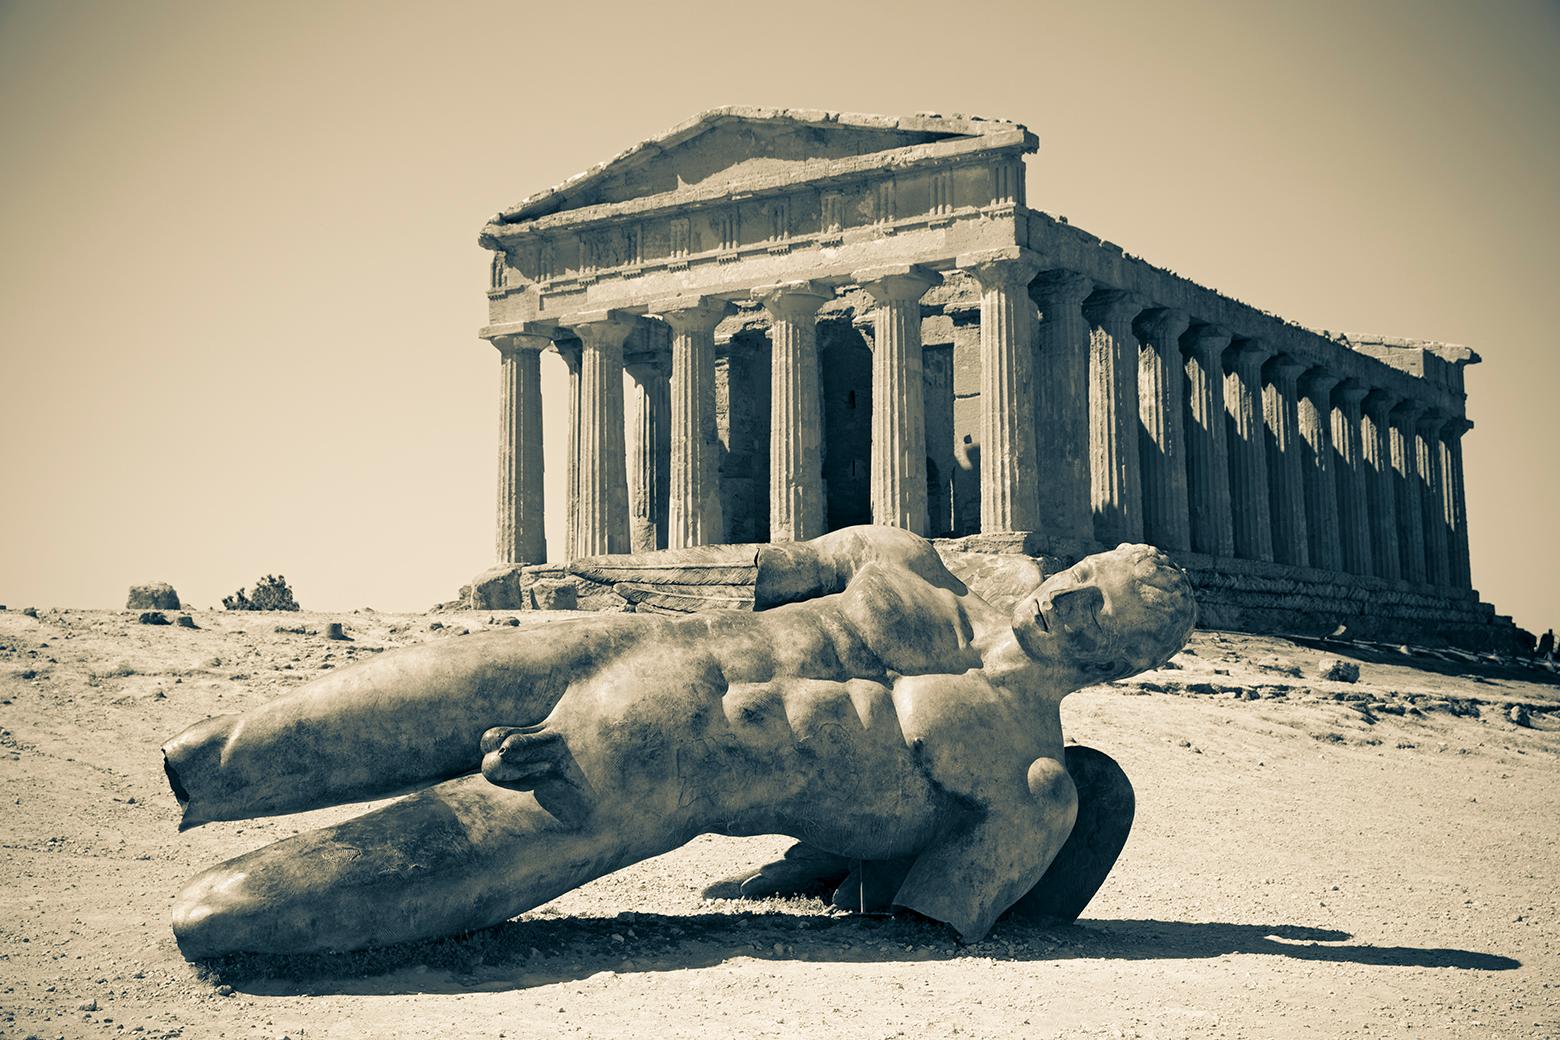 “Icarus”, Agrigento, Sicily, Italy, 2017. Archival Dye Pigment Print. Edition of 10, 19